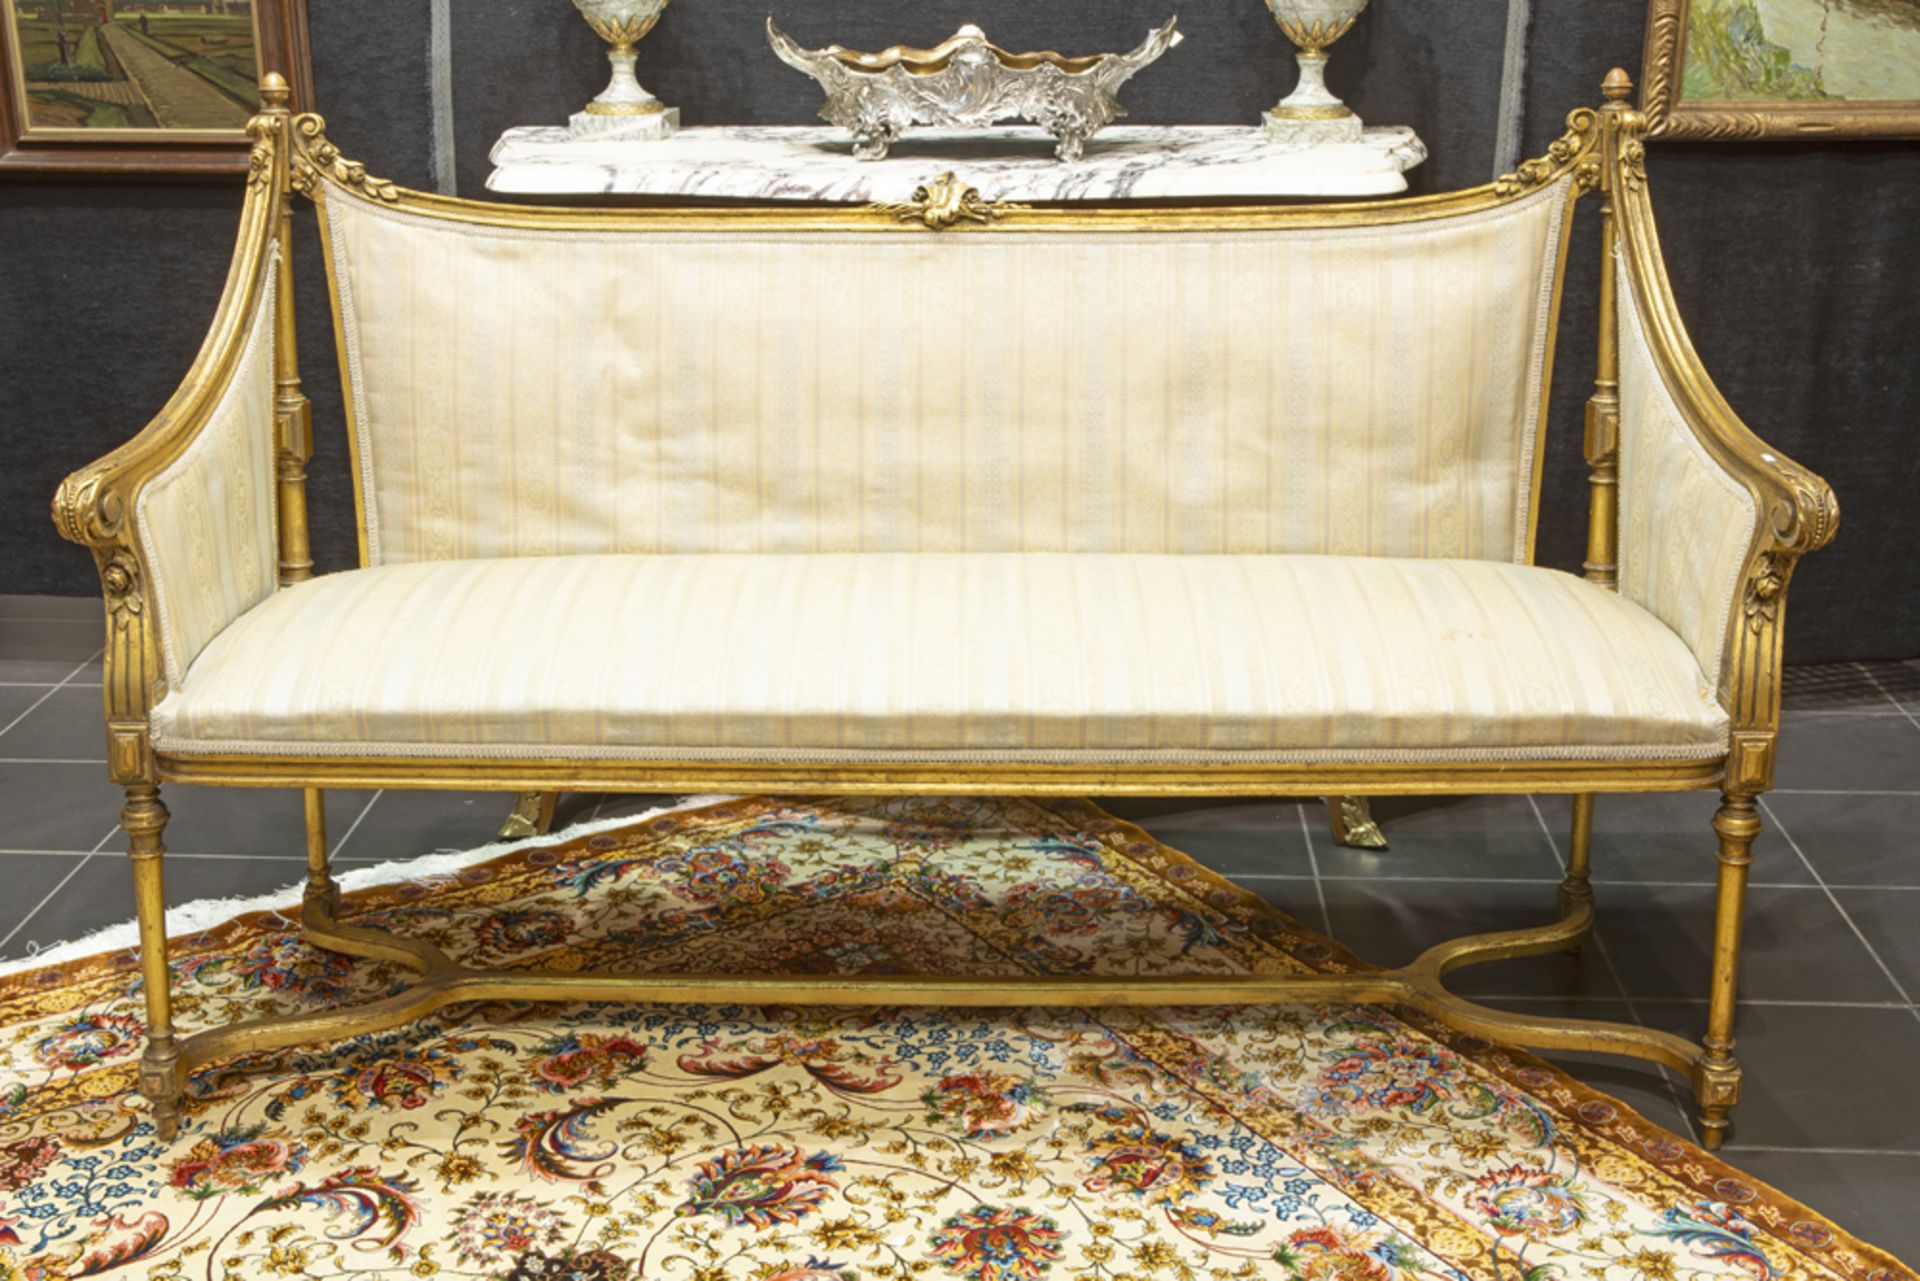 6pc neoclassical salon suite in sculpted and gilded wood with a Louis XVI design and ornamentation : - Image 4 of 4